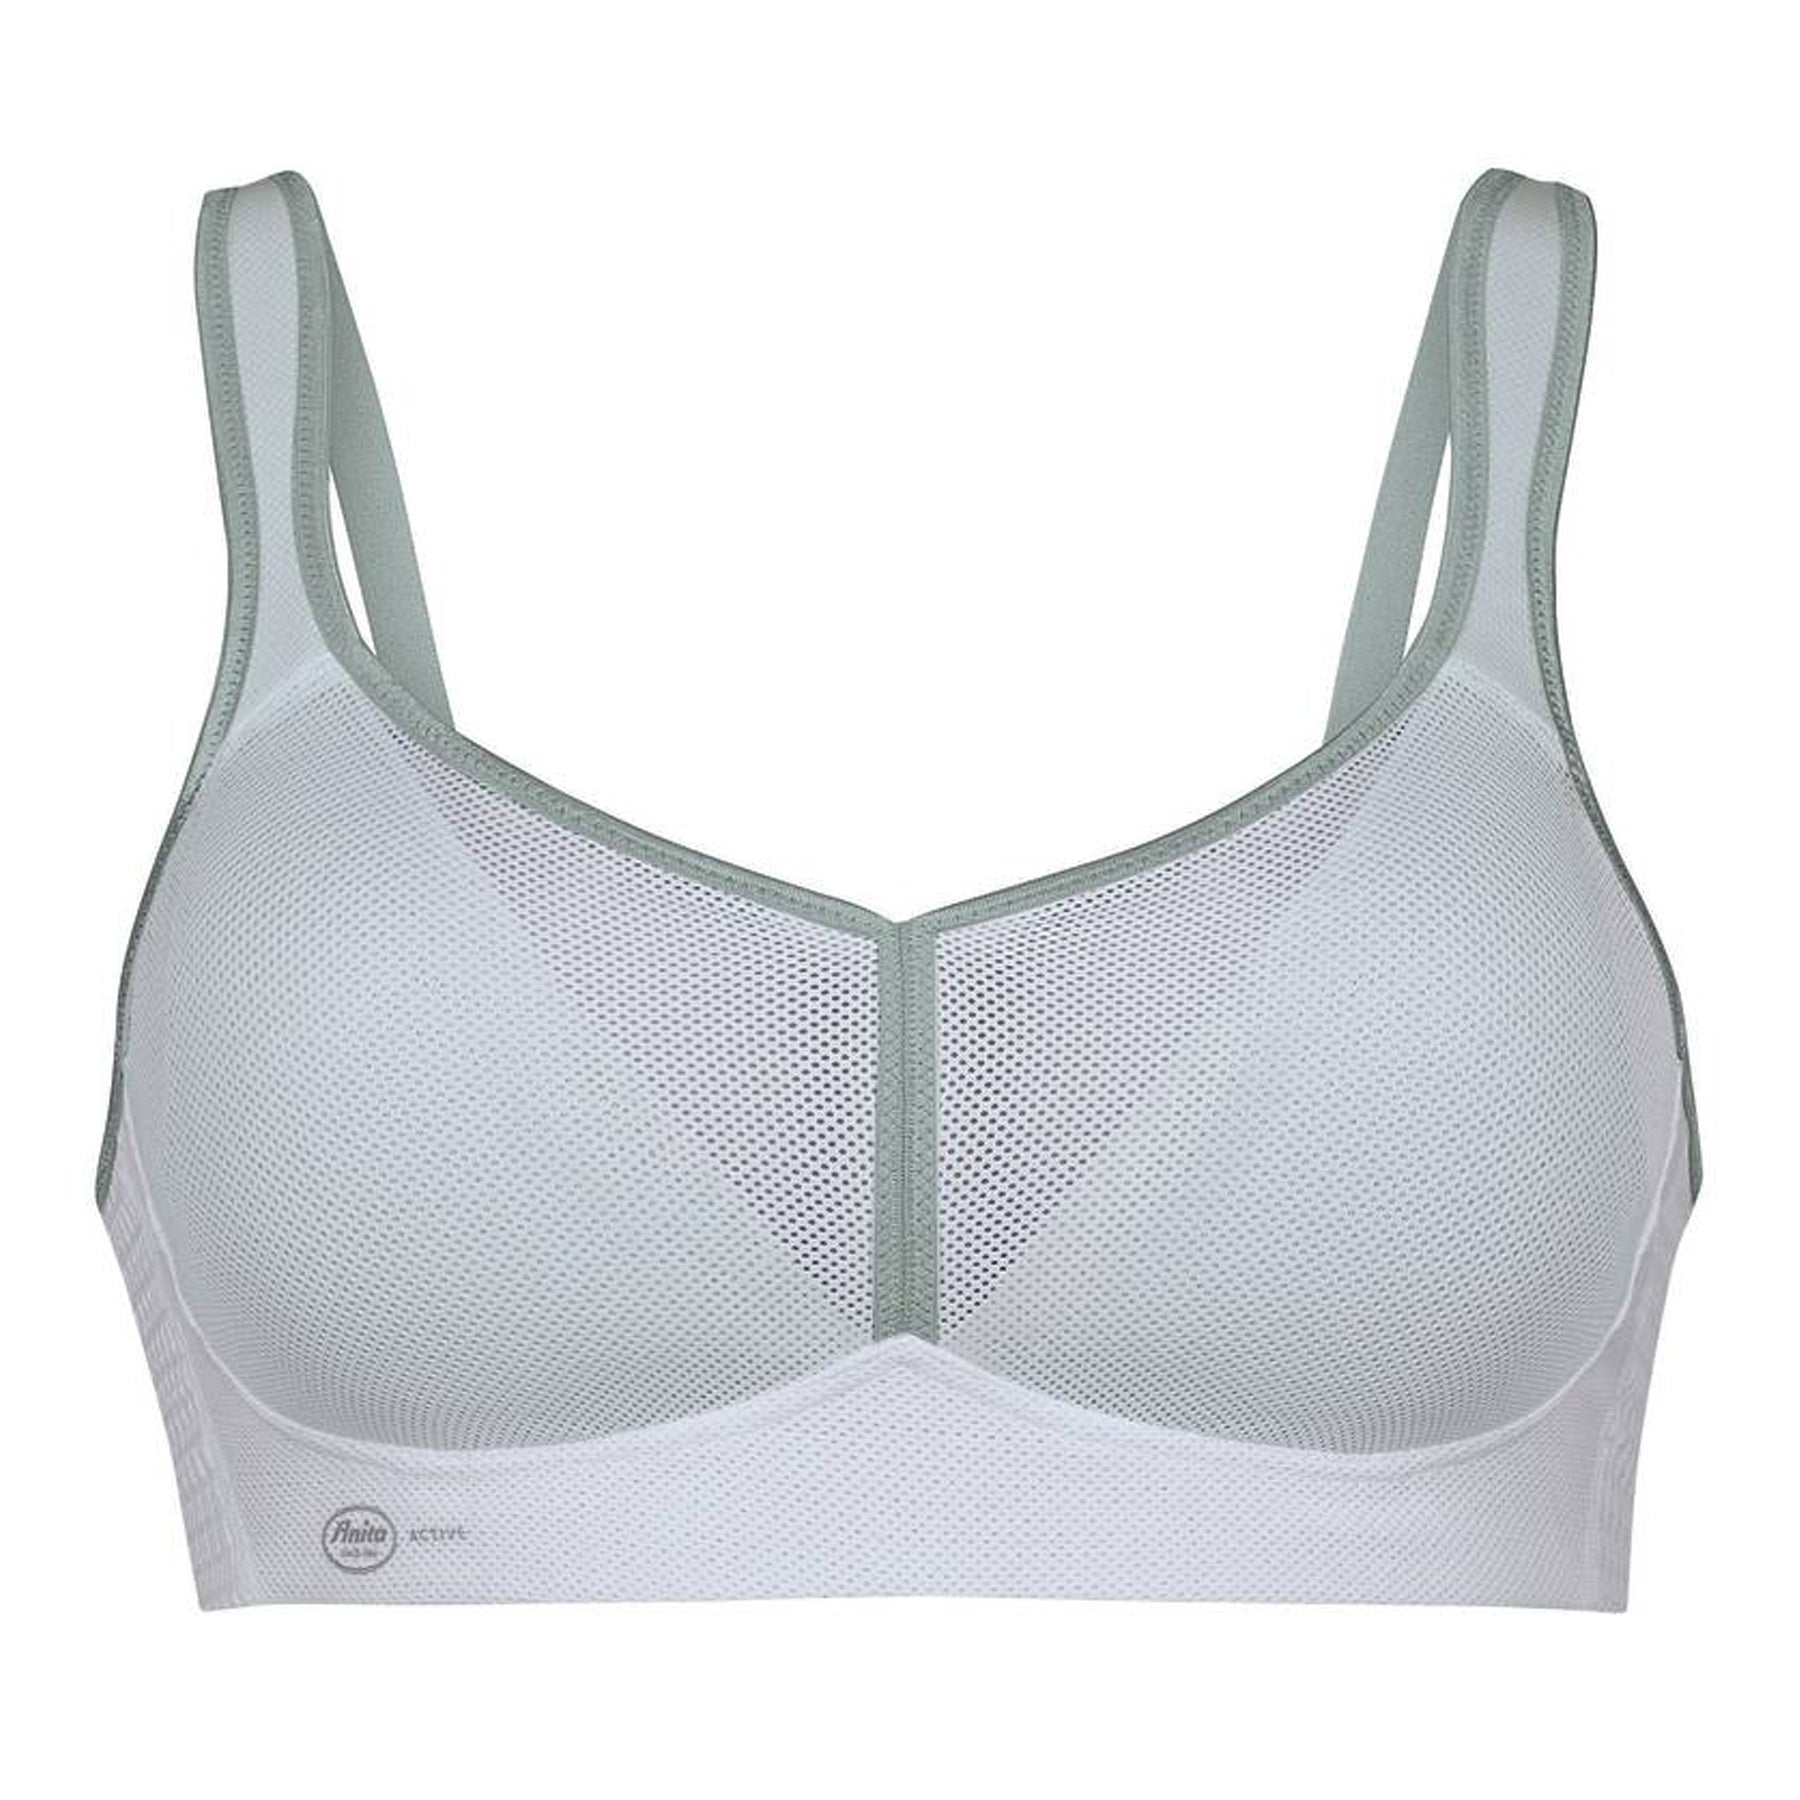 SOIE Grey Printed Non-Wired Lightly Padded Sports Bra - VibesGood